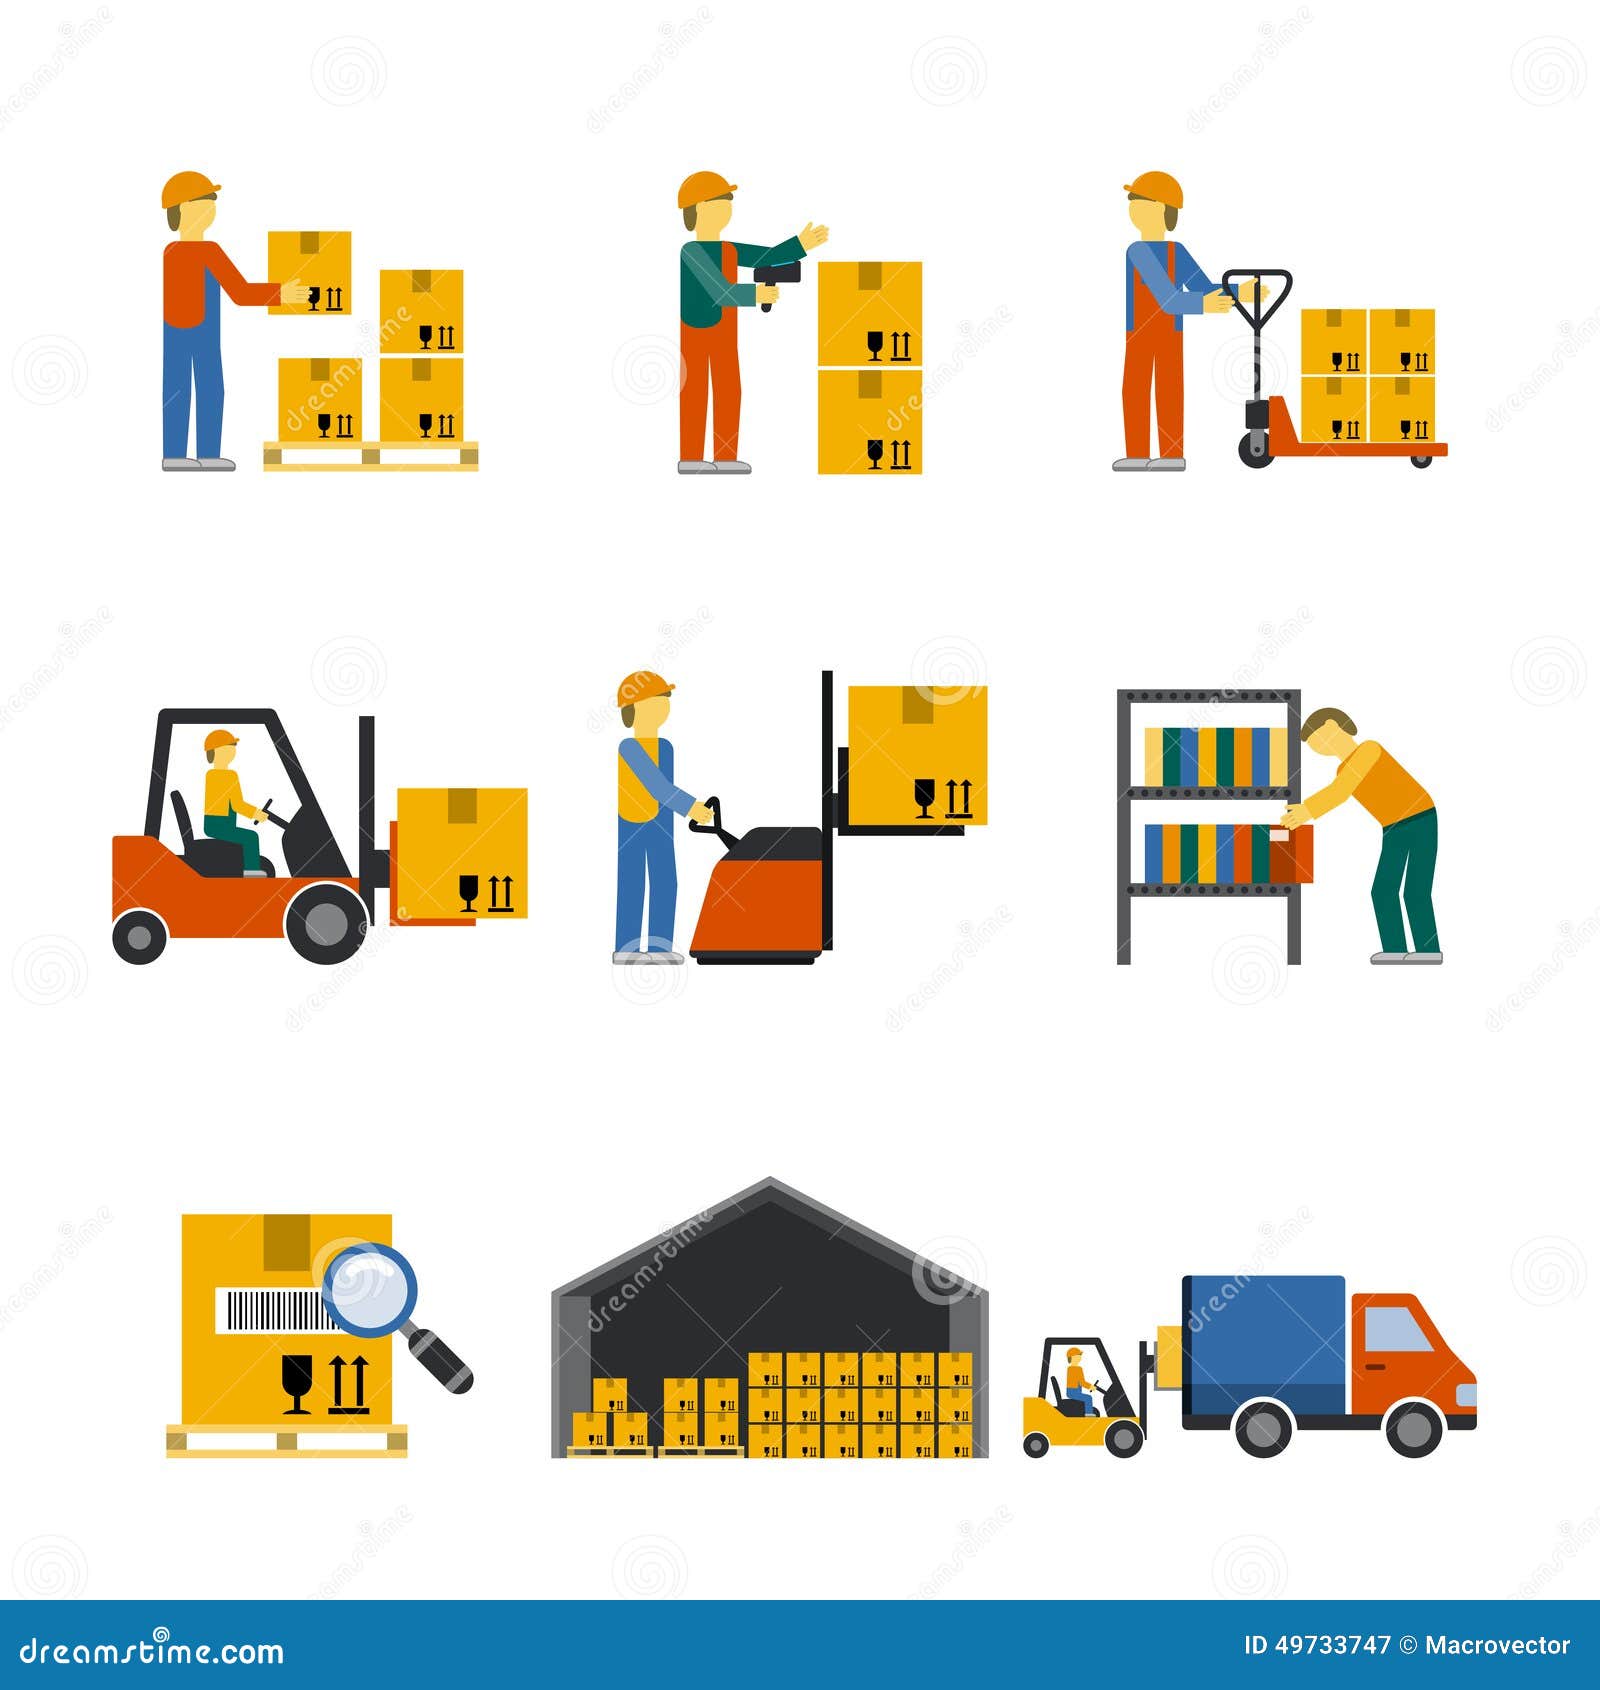 warehouse worker clipart free - photo #10